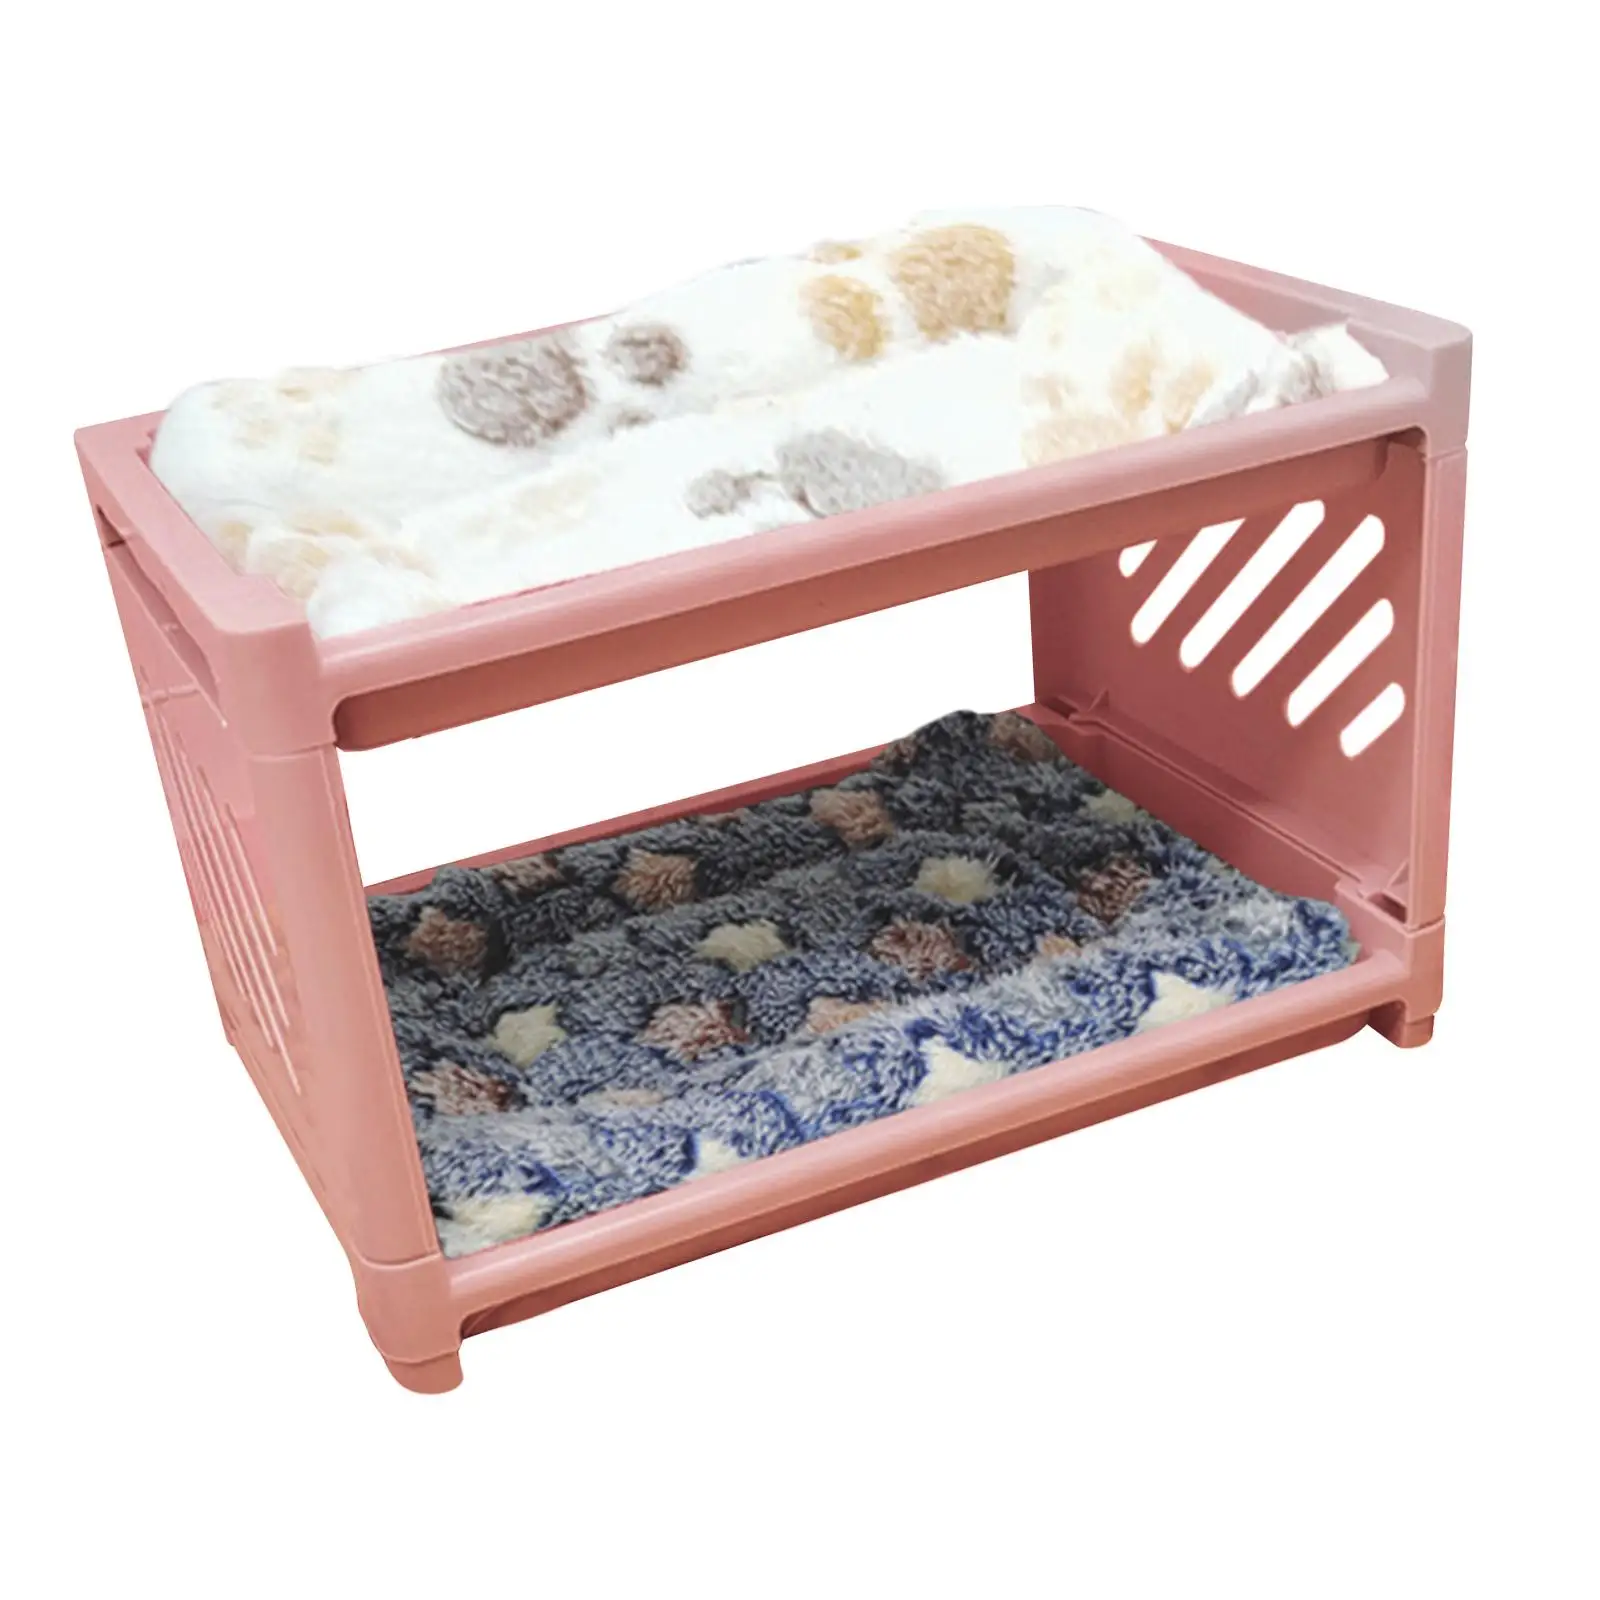 Large Hamster Bed with Mattress Play Hideaway Hut Winter Warm Shelter Habitat Cave for Bunny Pet Supplies Ferret Squirrel Mice